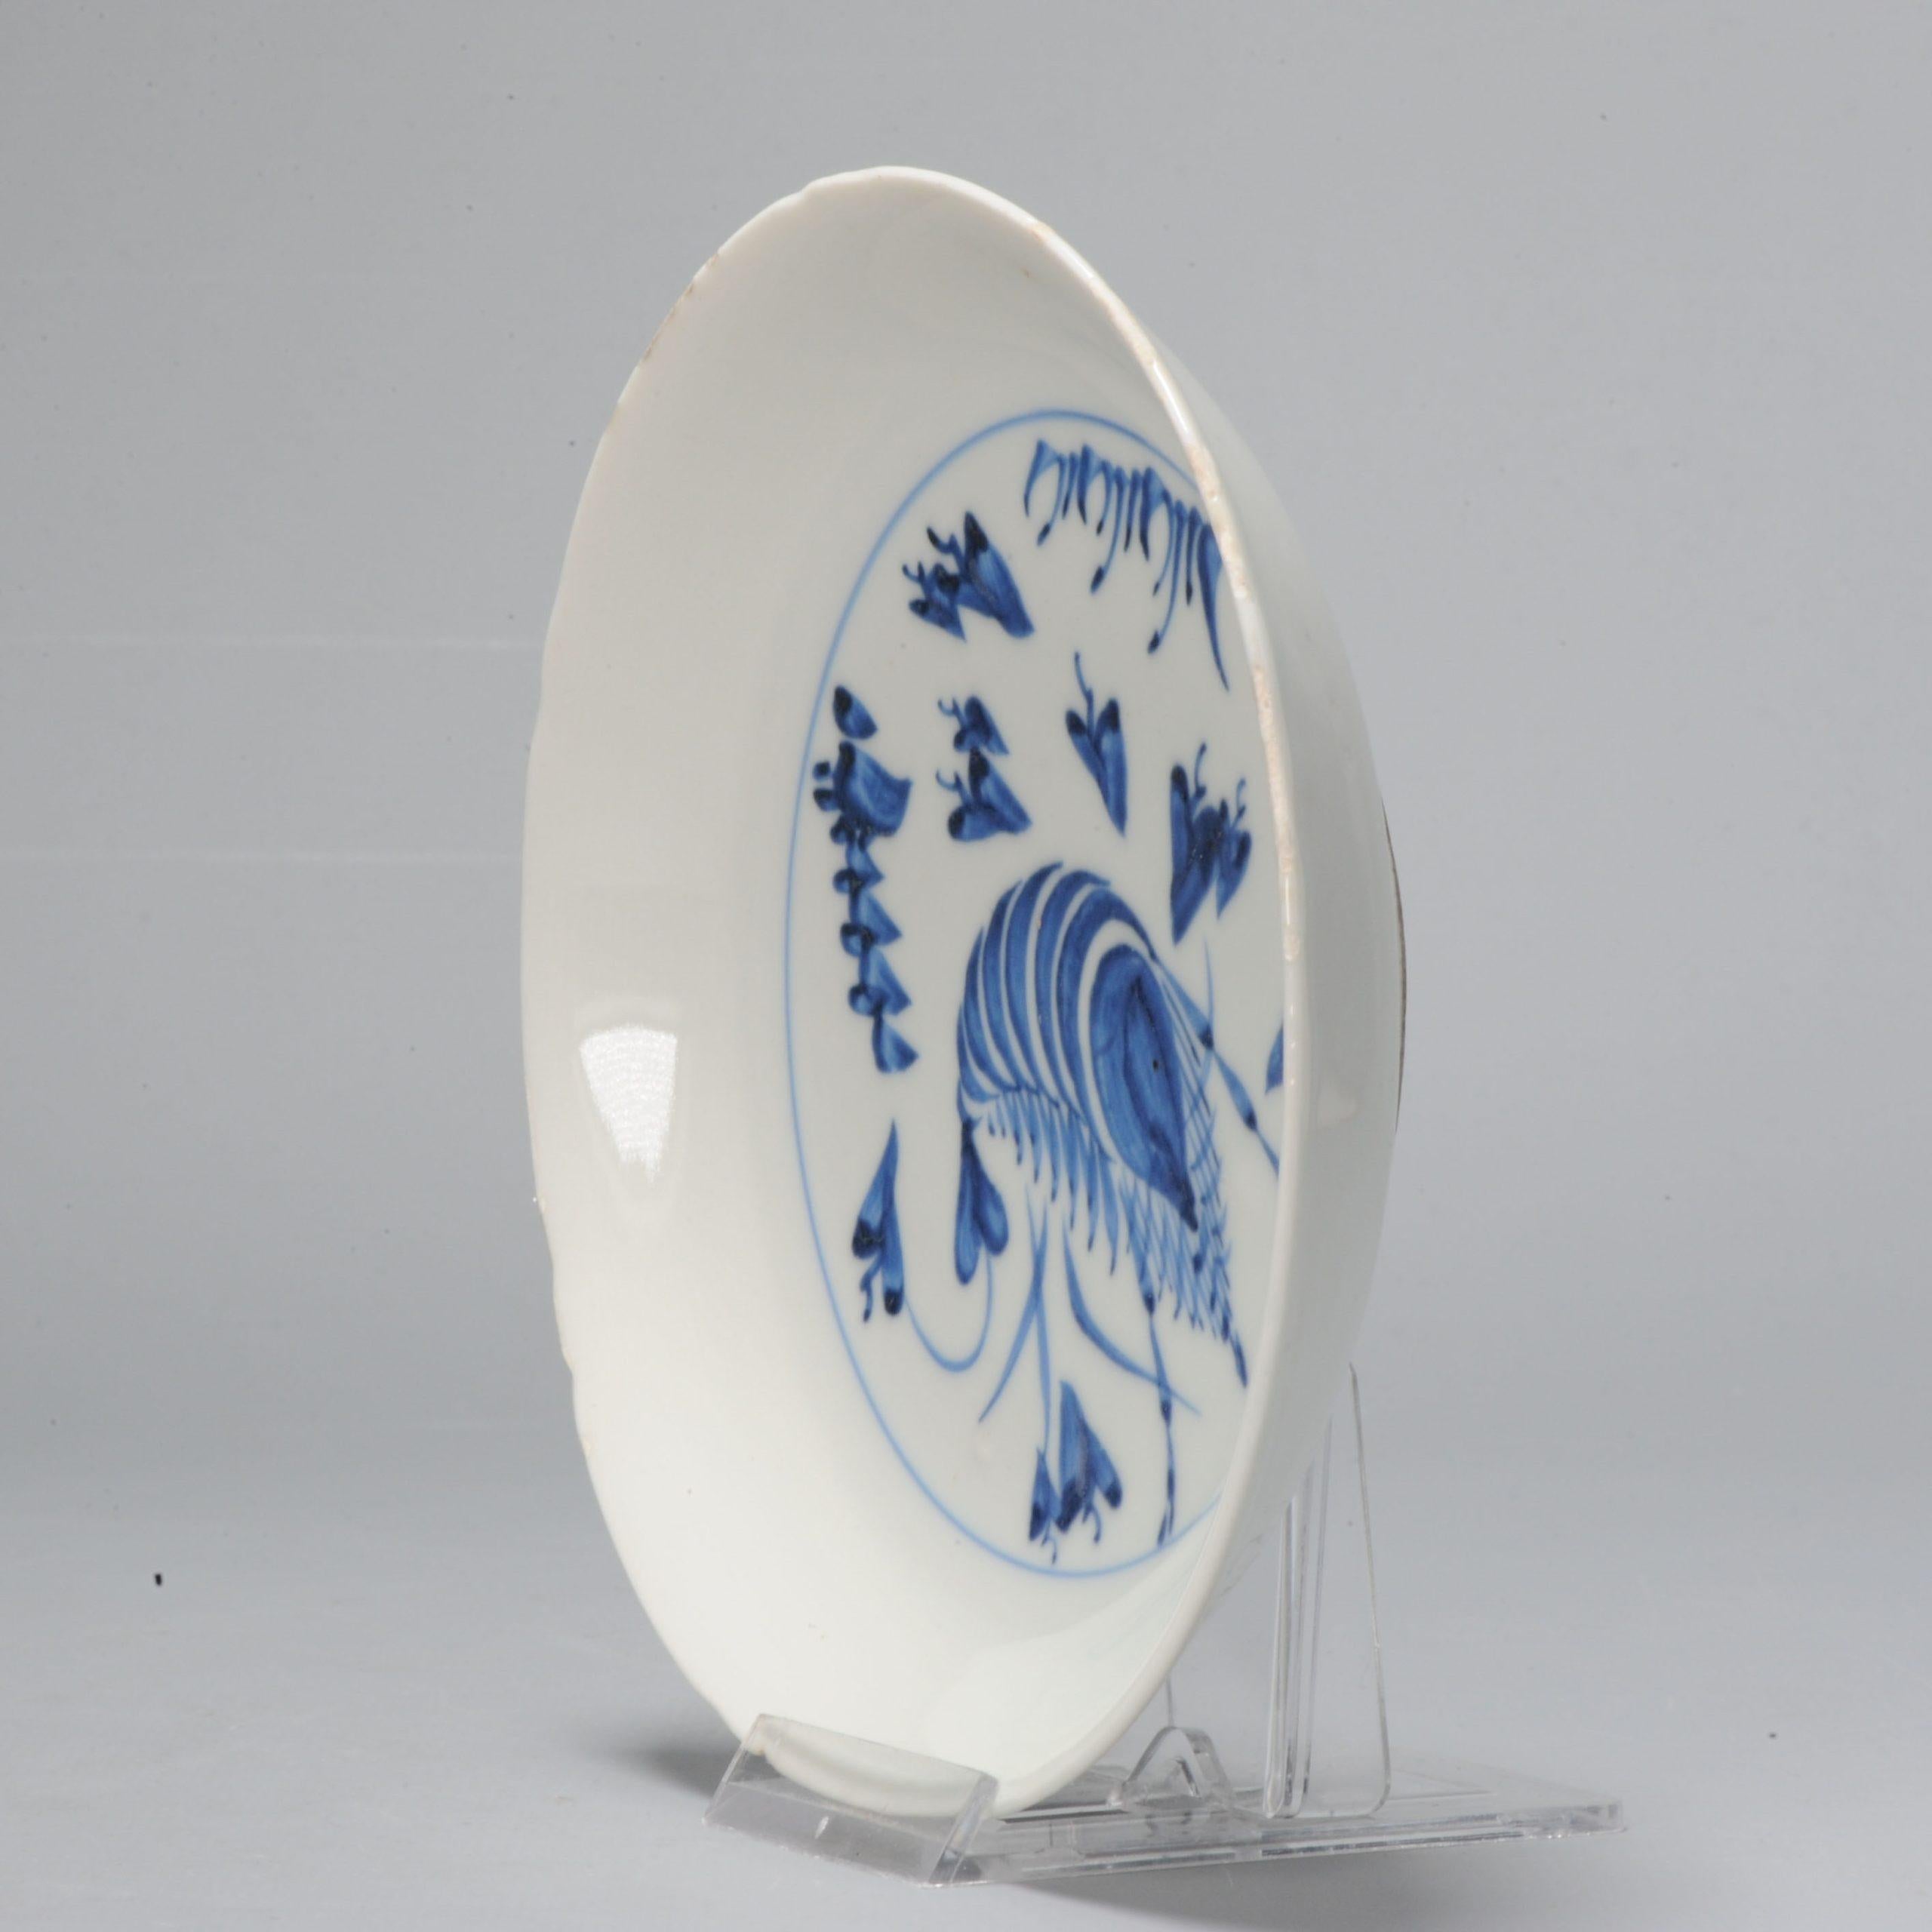 Dish Porcelain with underglaze blue shrimp decoration

Ming dynasty, Tianqi or Chongzhen period (1621-1644).

Additional information:
Material: Porcelain & Pottery
Region of Origin: China
Emperor: Chongzhen (1627-1644), Tianqi (1620-1627)
Period: